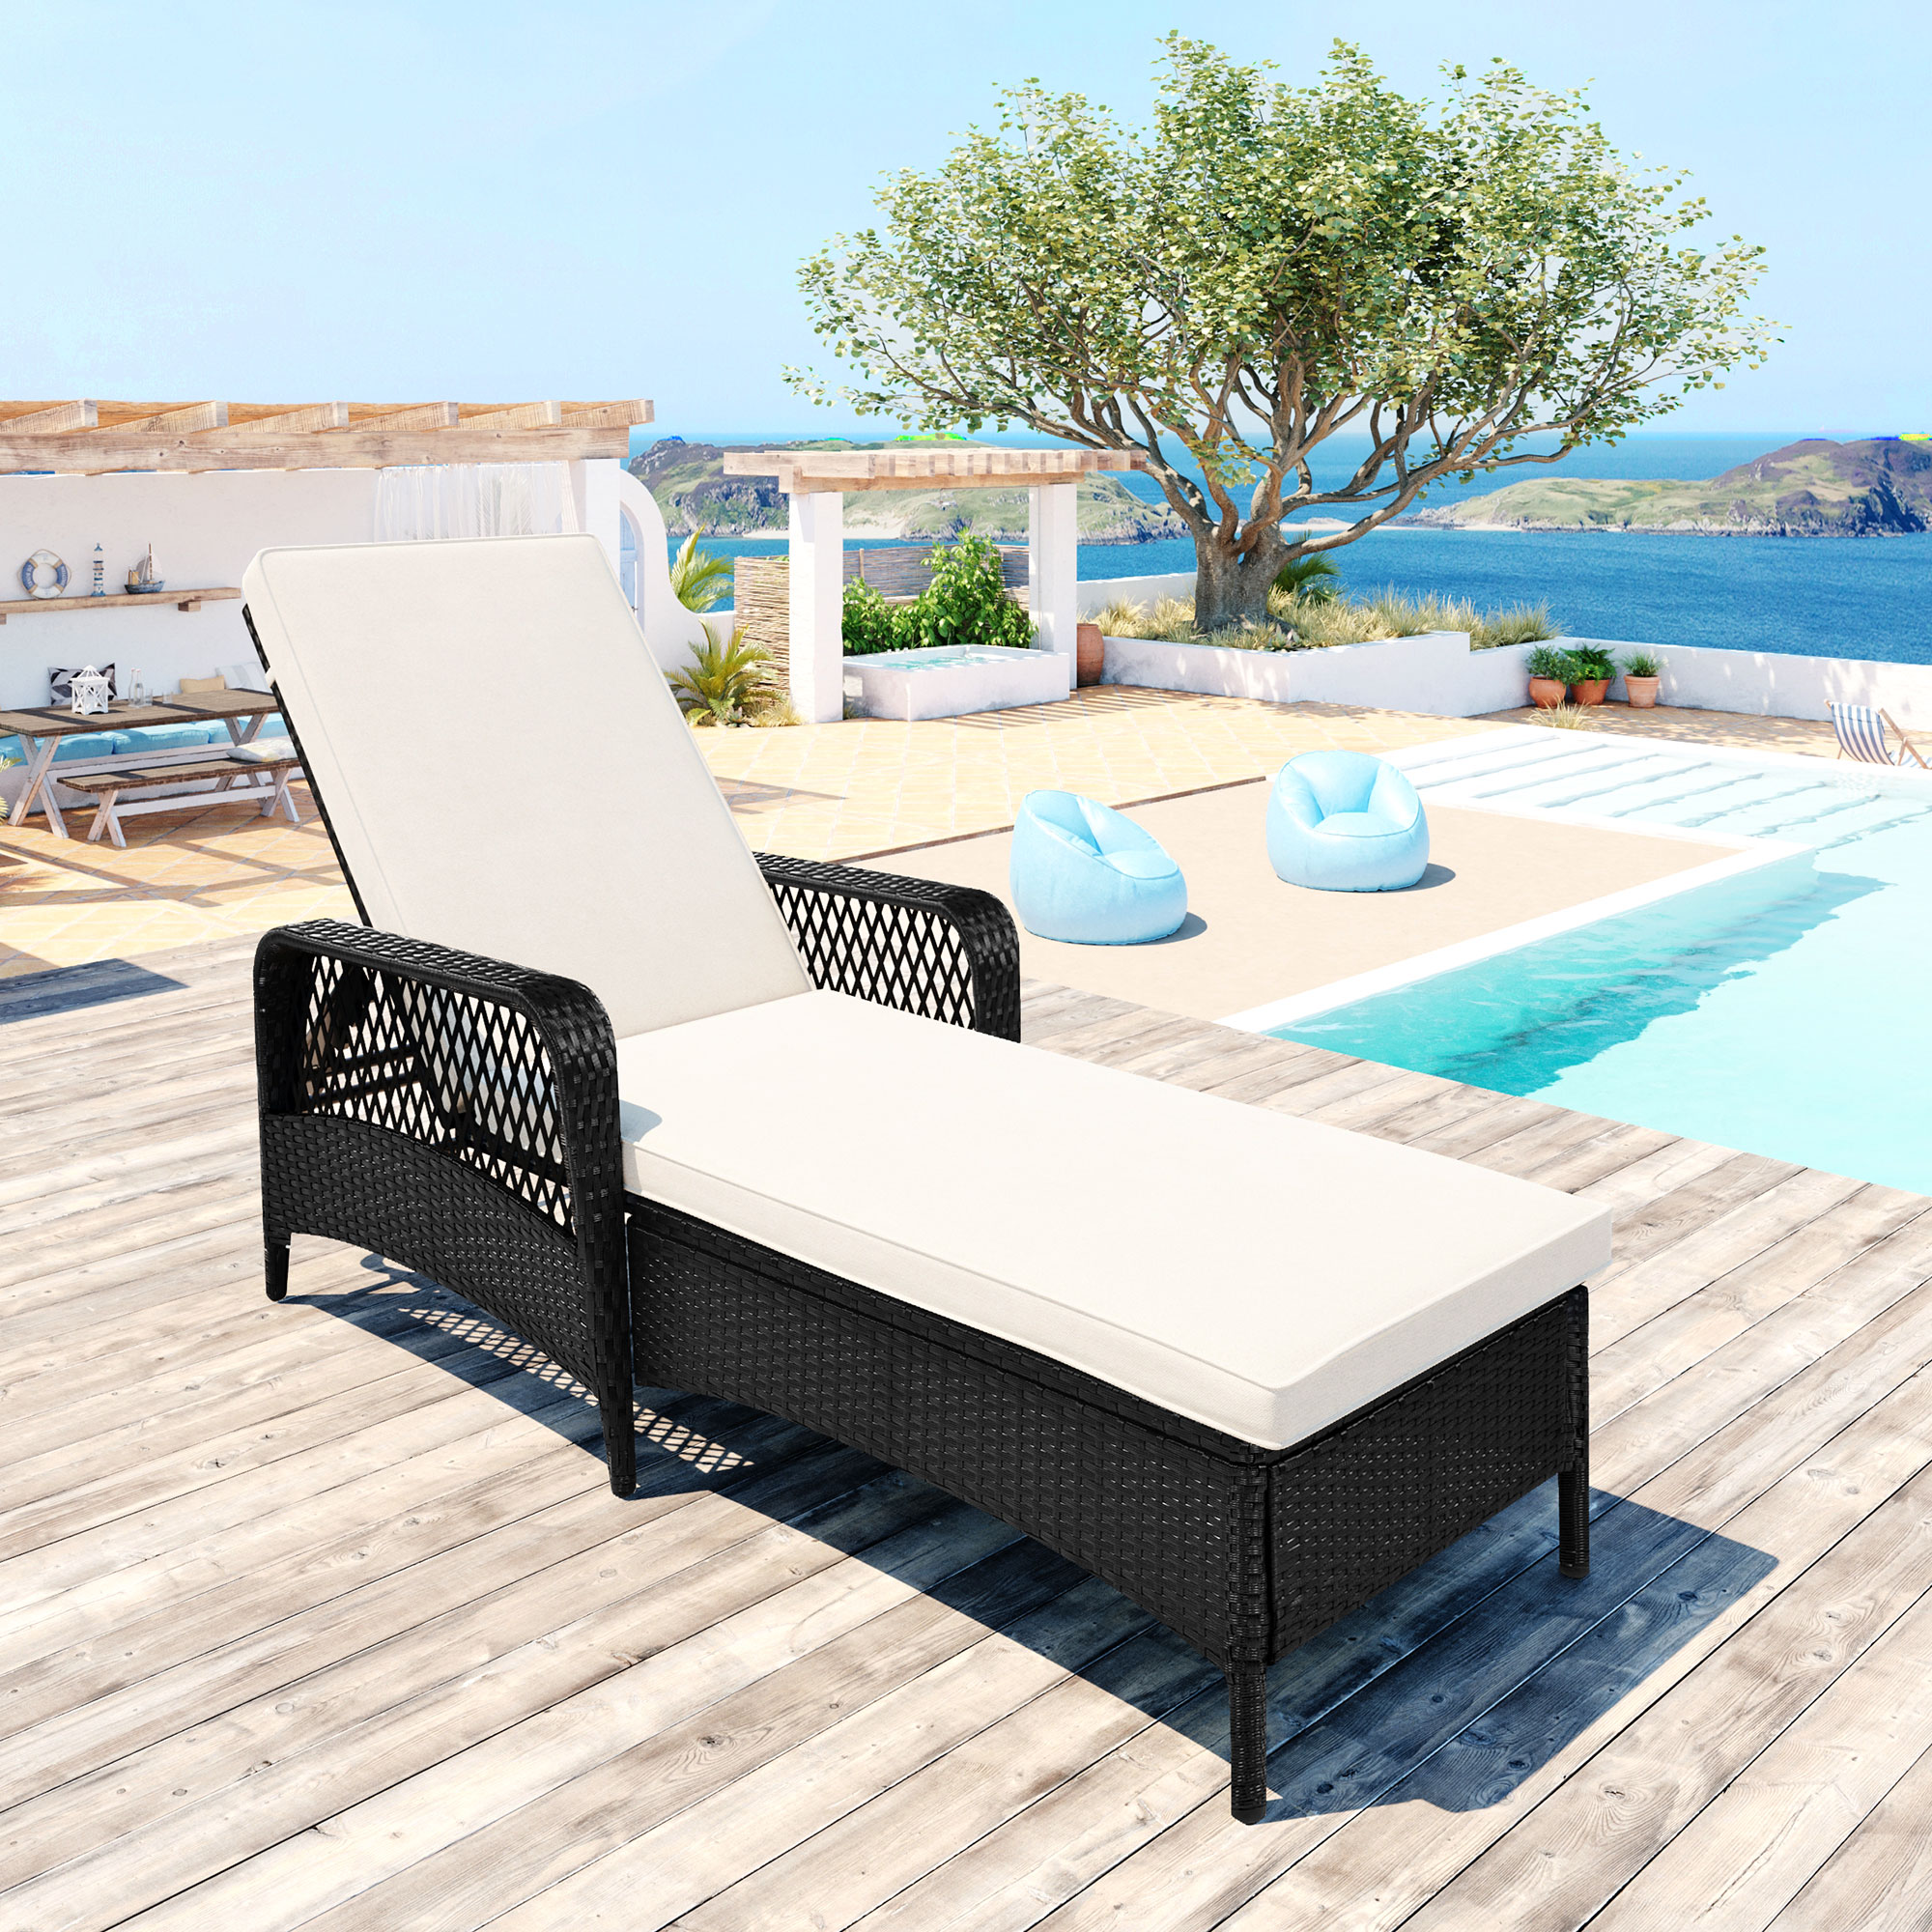 Outdoor Patio Reclining Chair Sunbed with Adjustable Backrest, Black Wicker All-Weather Chaise Lounge Chair for Garden Yard Patio - image 3 of 8